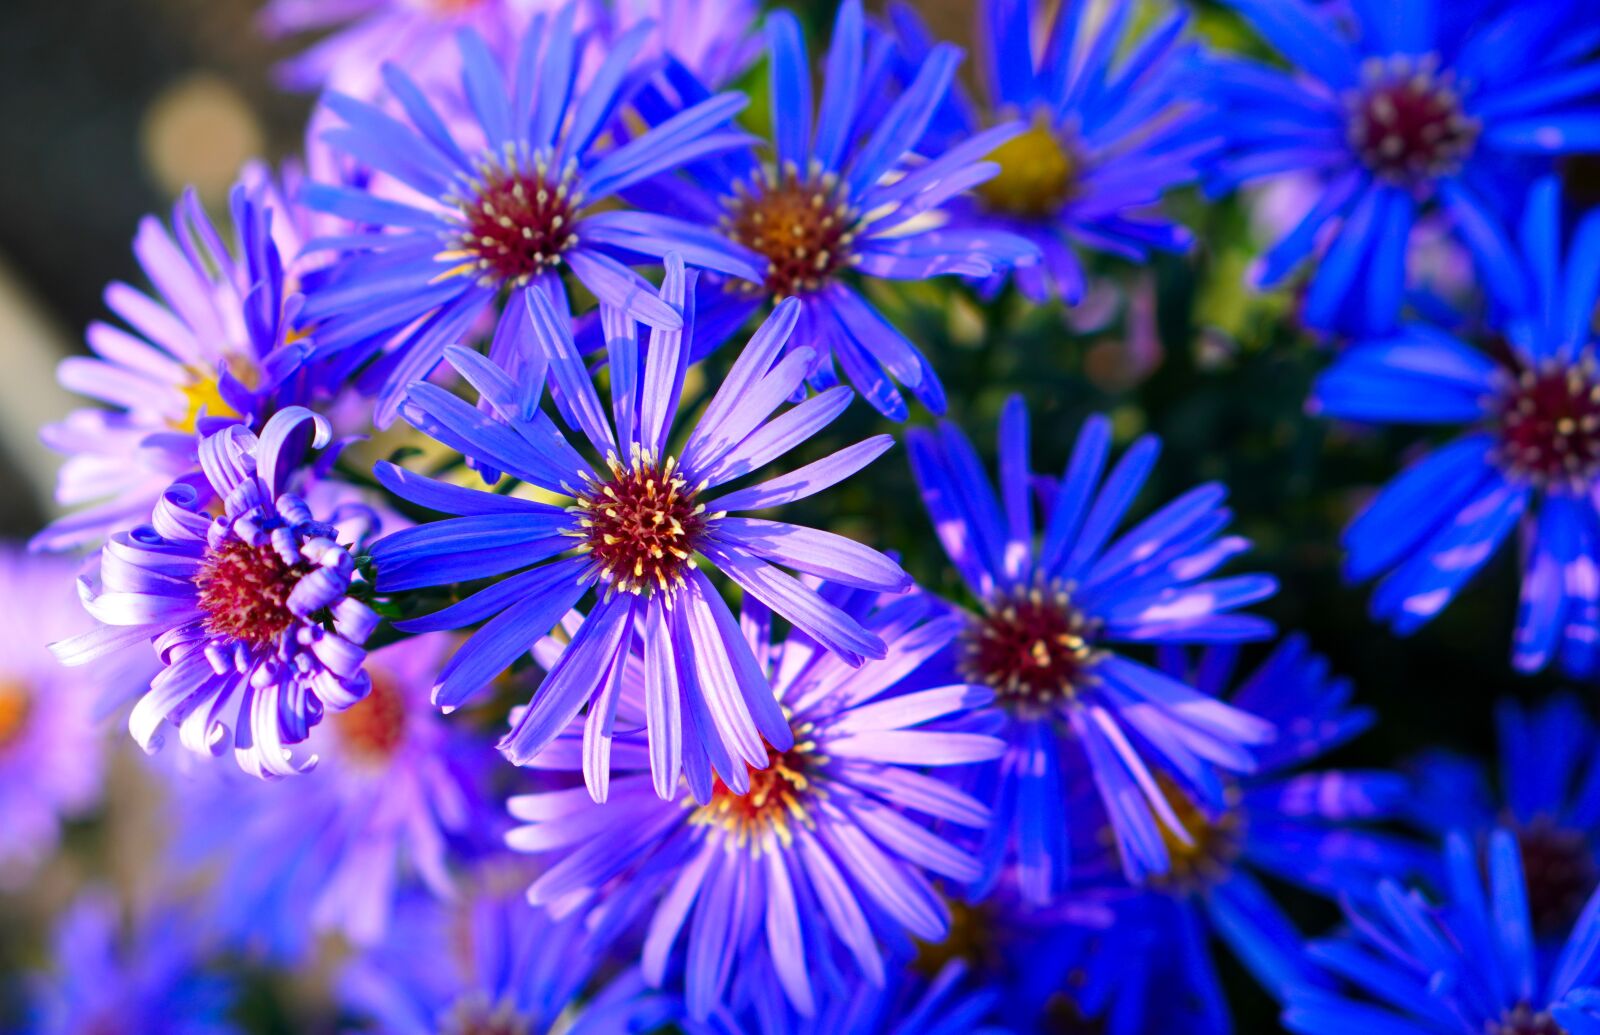 Sony a6400 sample photo. "Flowers, asters, garden" photography